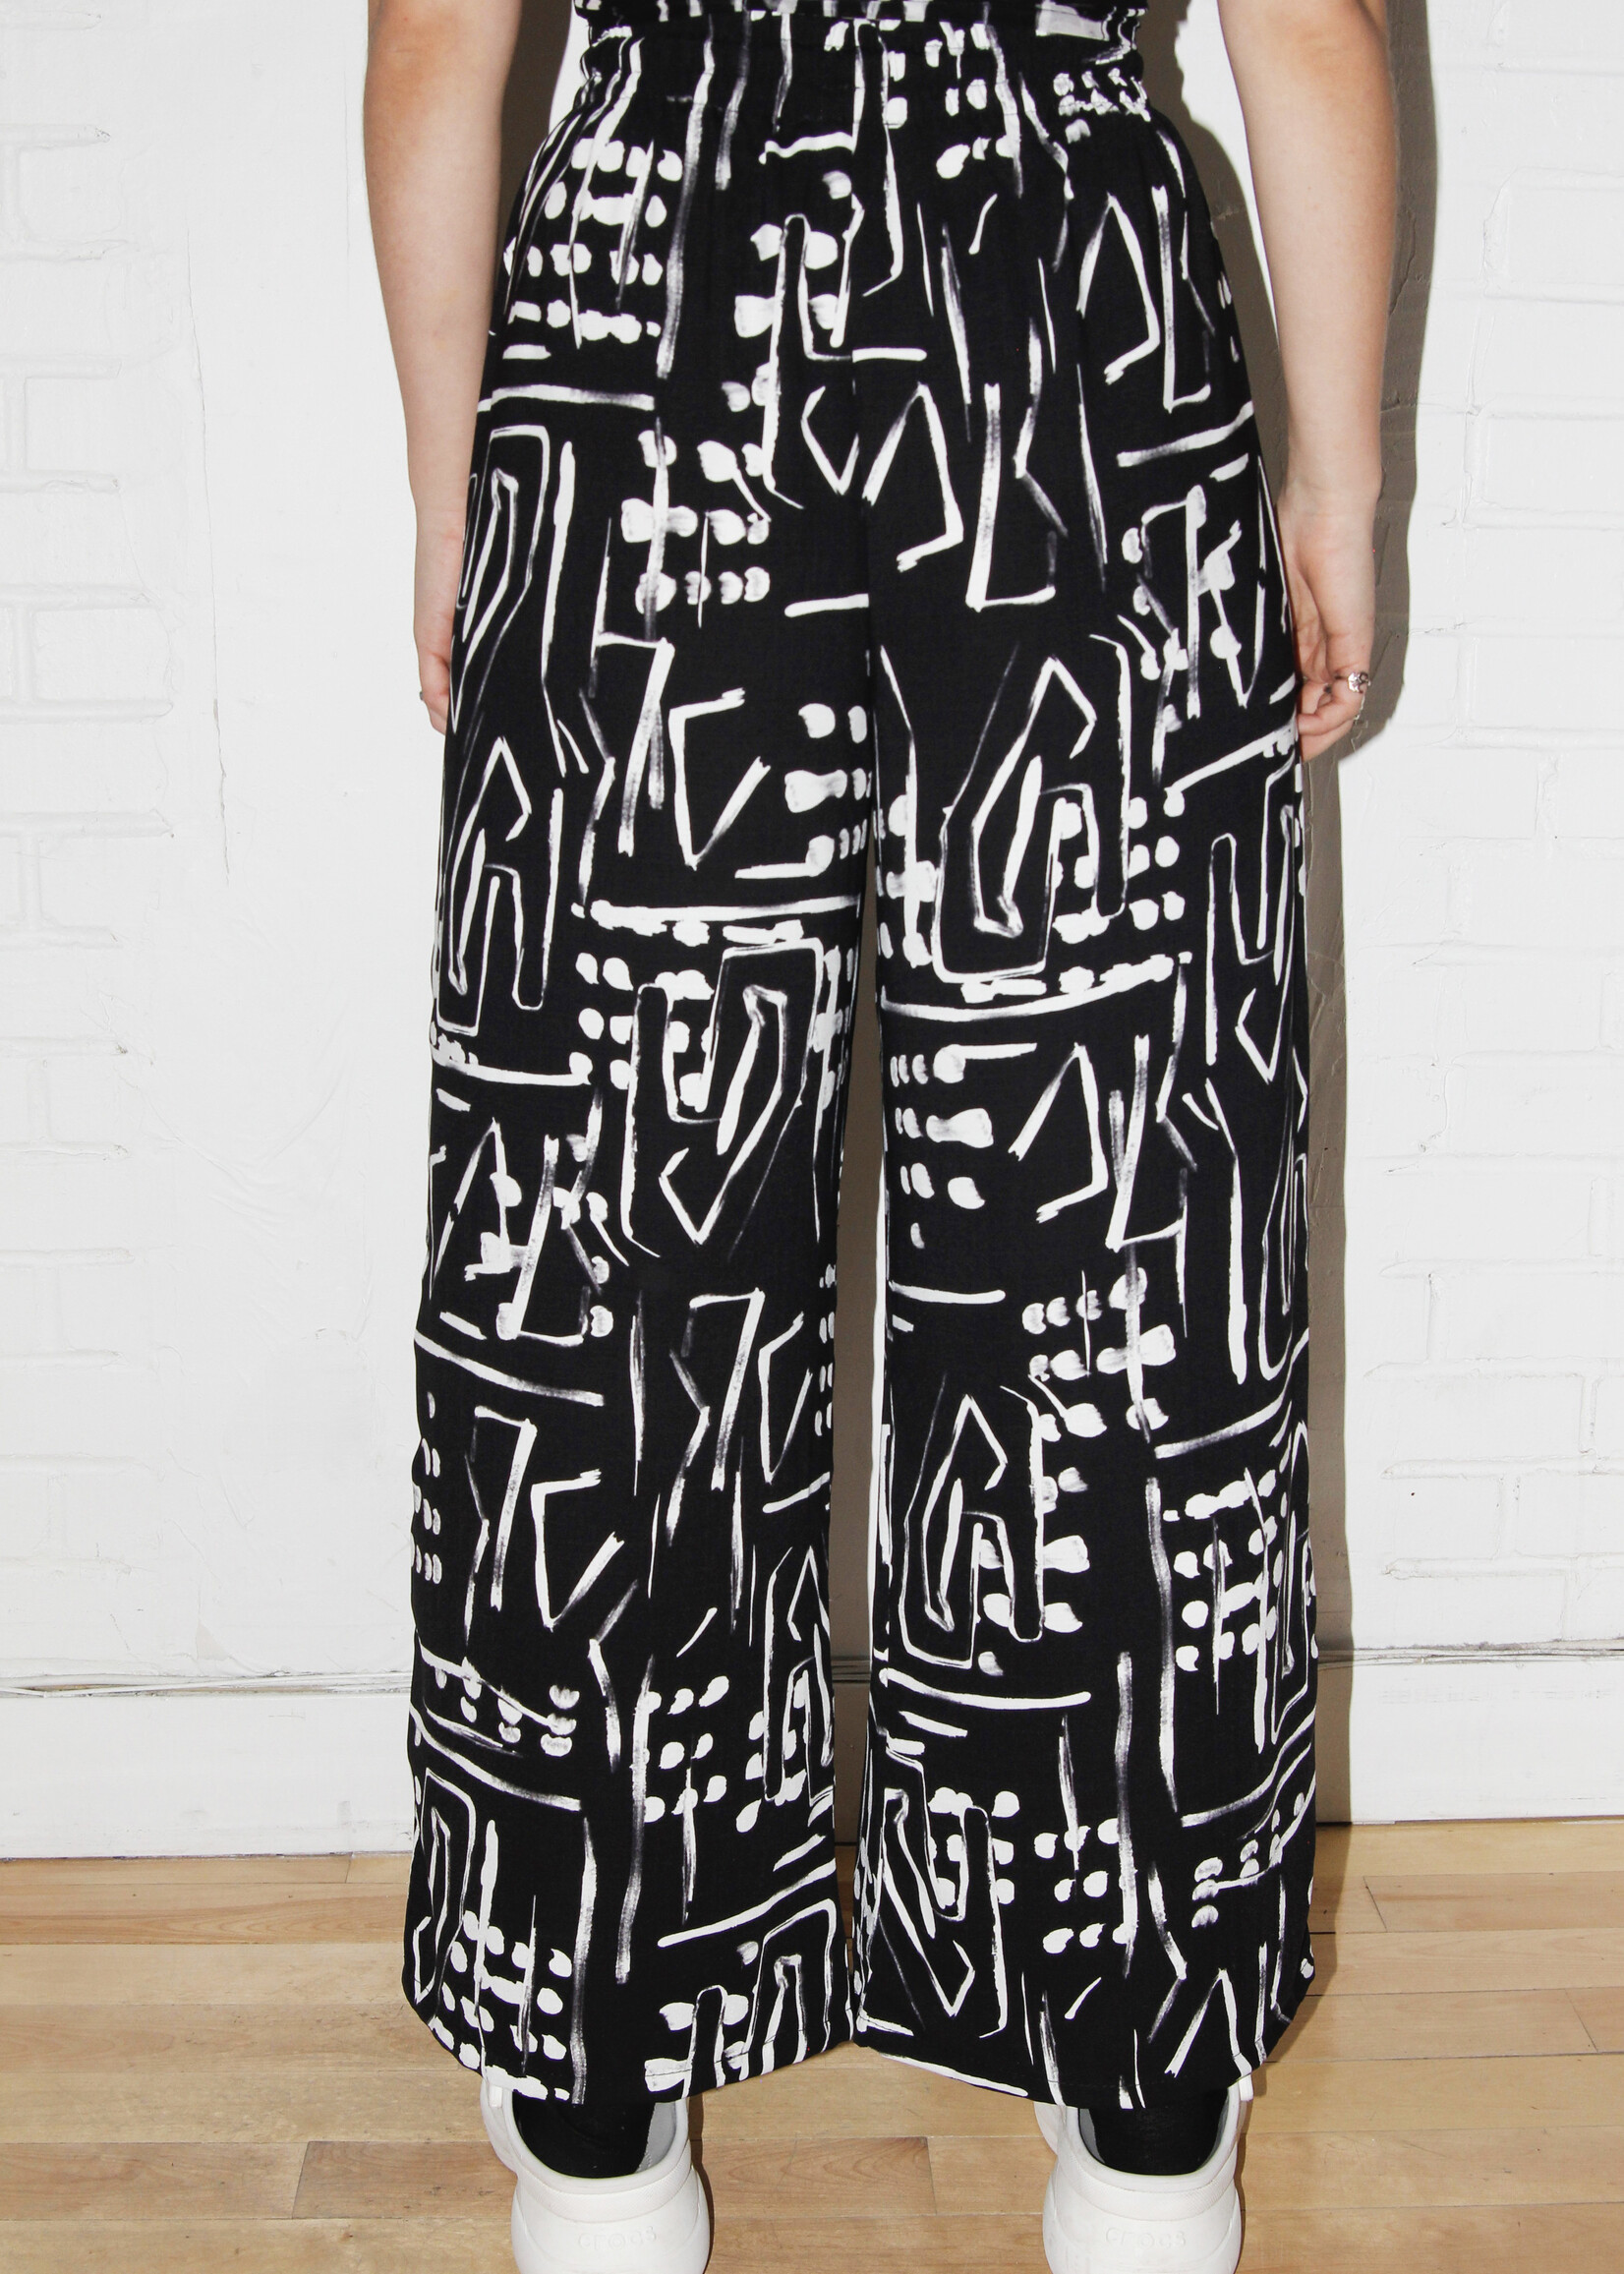 Studio Citizen Studio Citizen Relaxed Fit Drawstring Pants in Black and White Ink Print